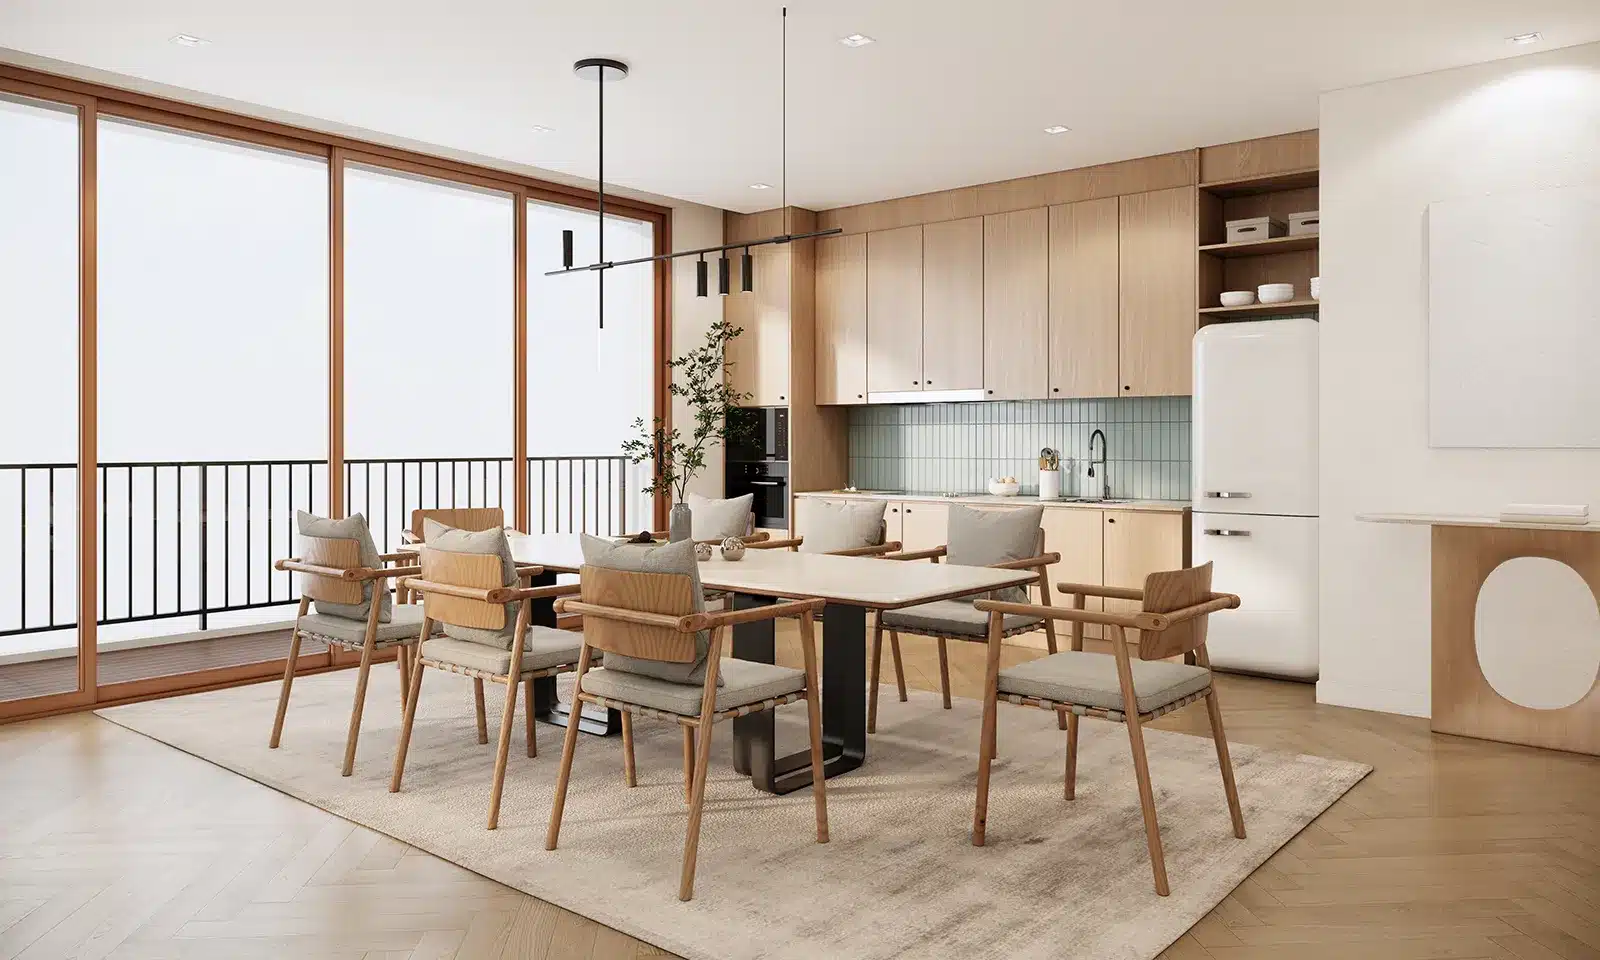 A well-lit kitchen and dining space with color-coordinated design elements, featuring natural wood tones and subtle pastel accents.